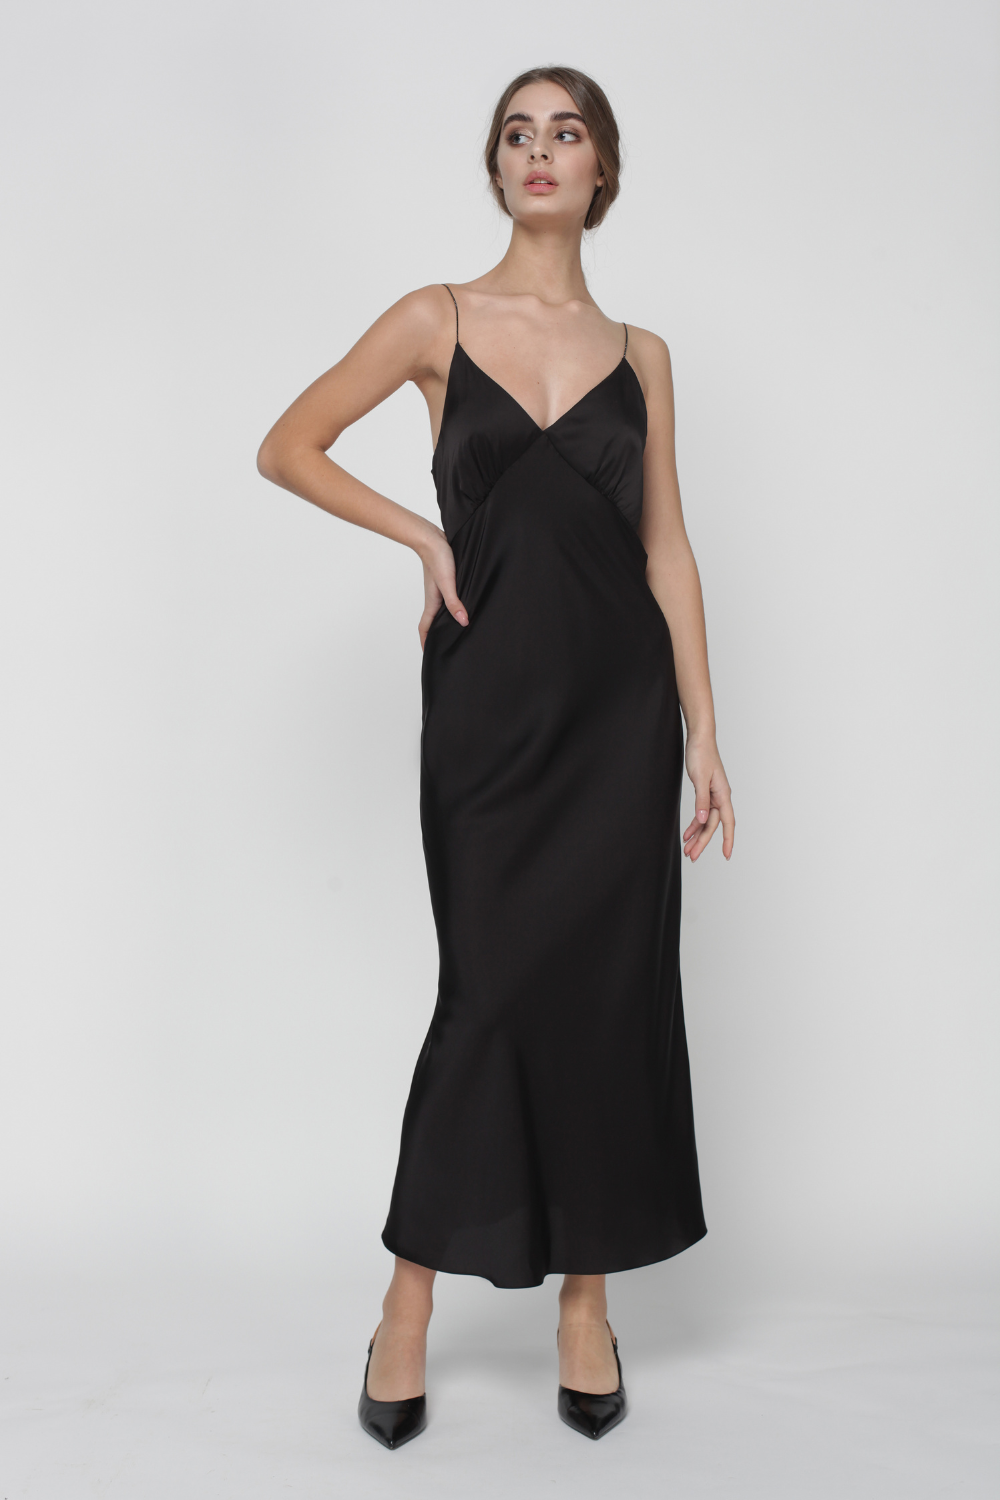 Dress combination with a cup on thin straps with rhinestones, black (MissSecret) DR-017-black